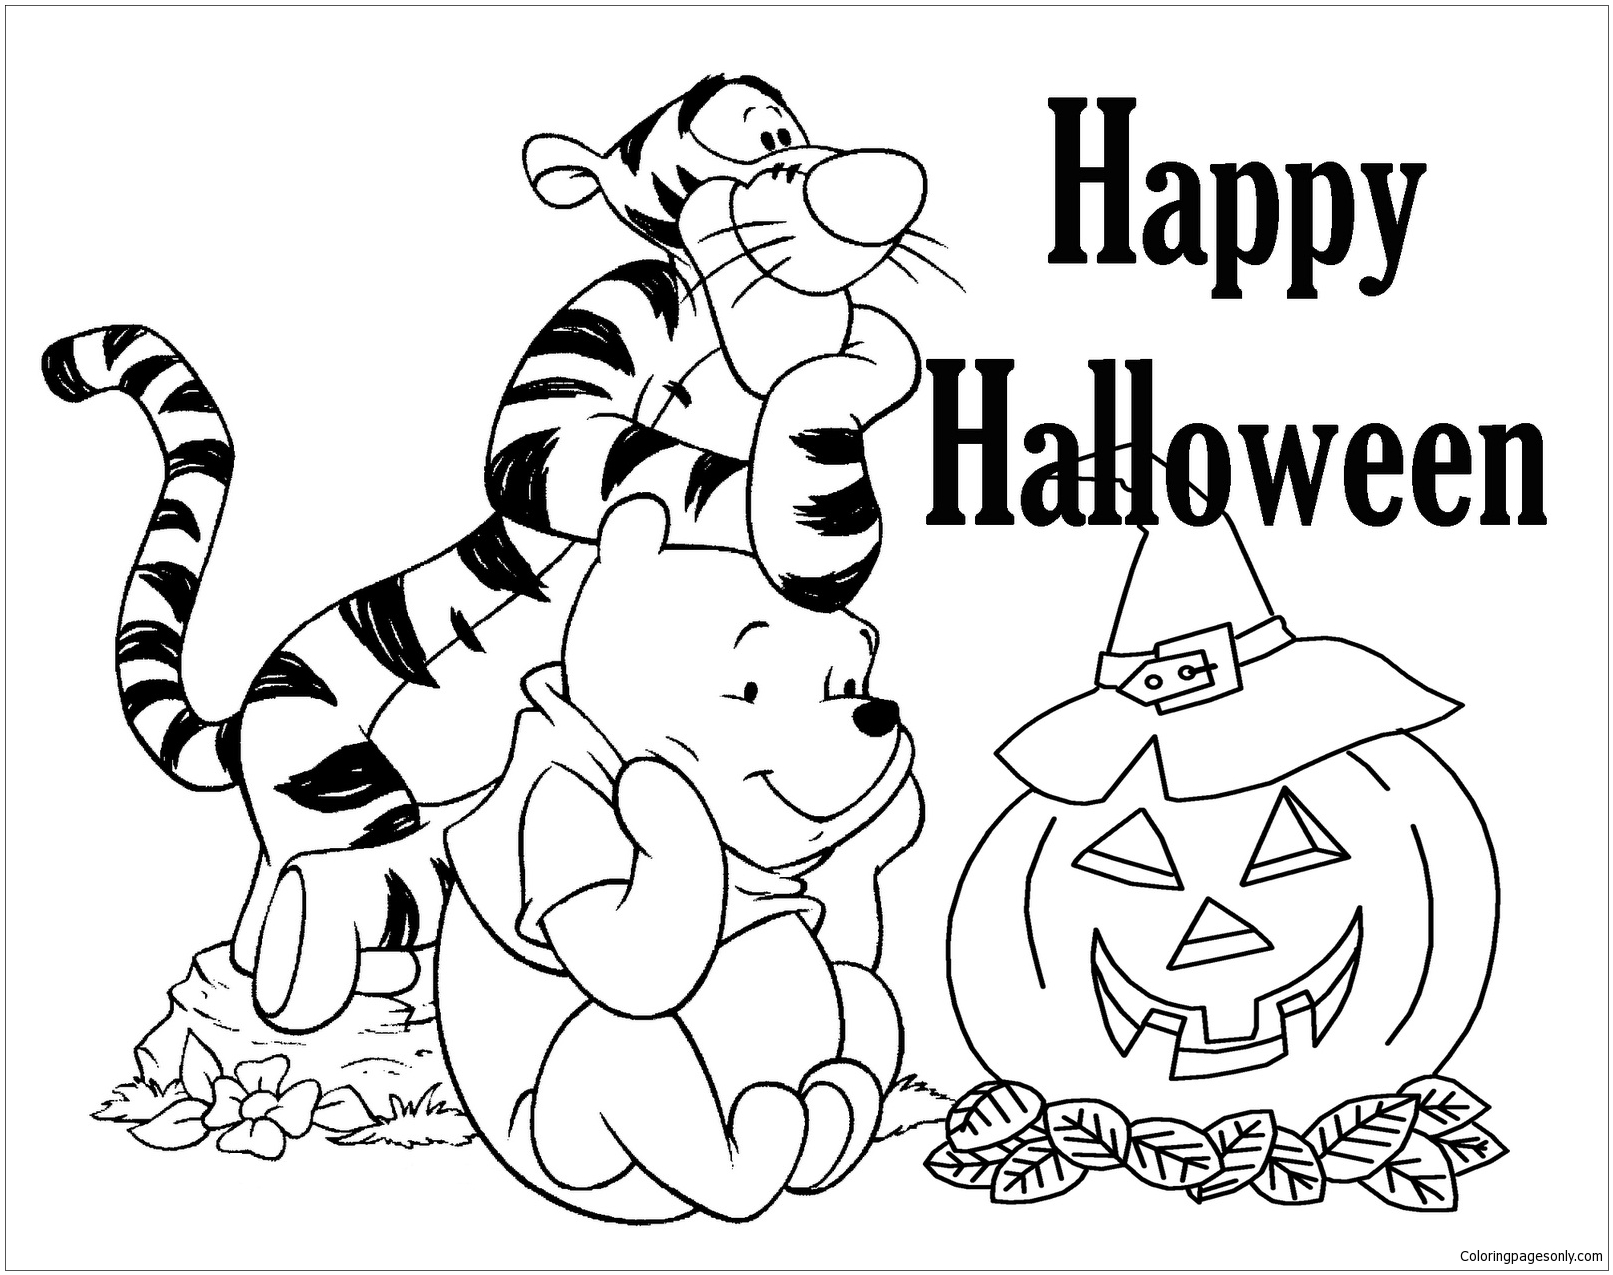 Happy Halloween 5 Coloring Pages - Halloween Coloring Pages - Coloring